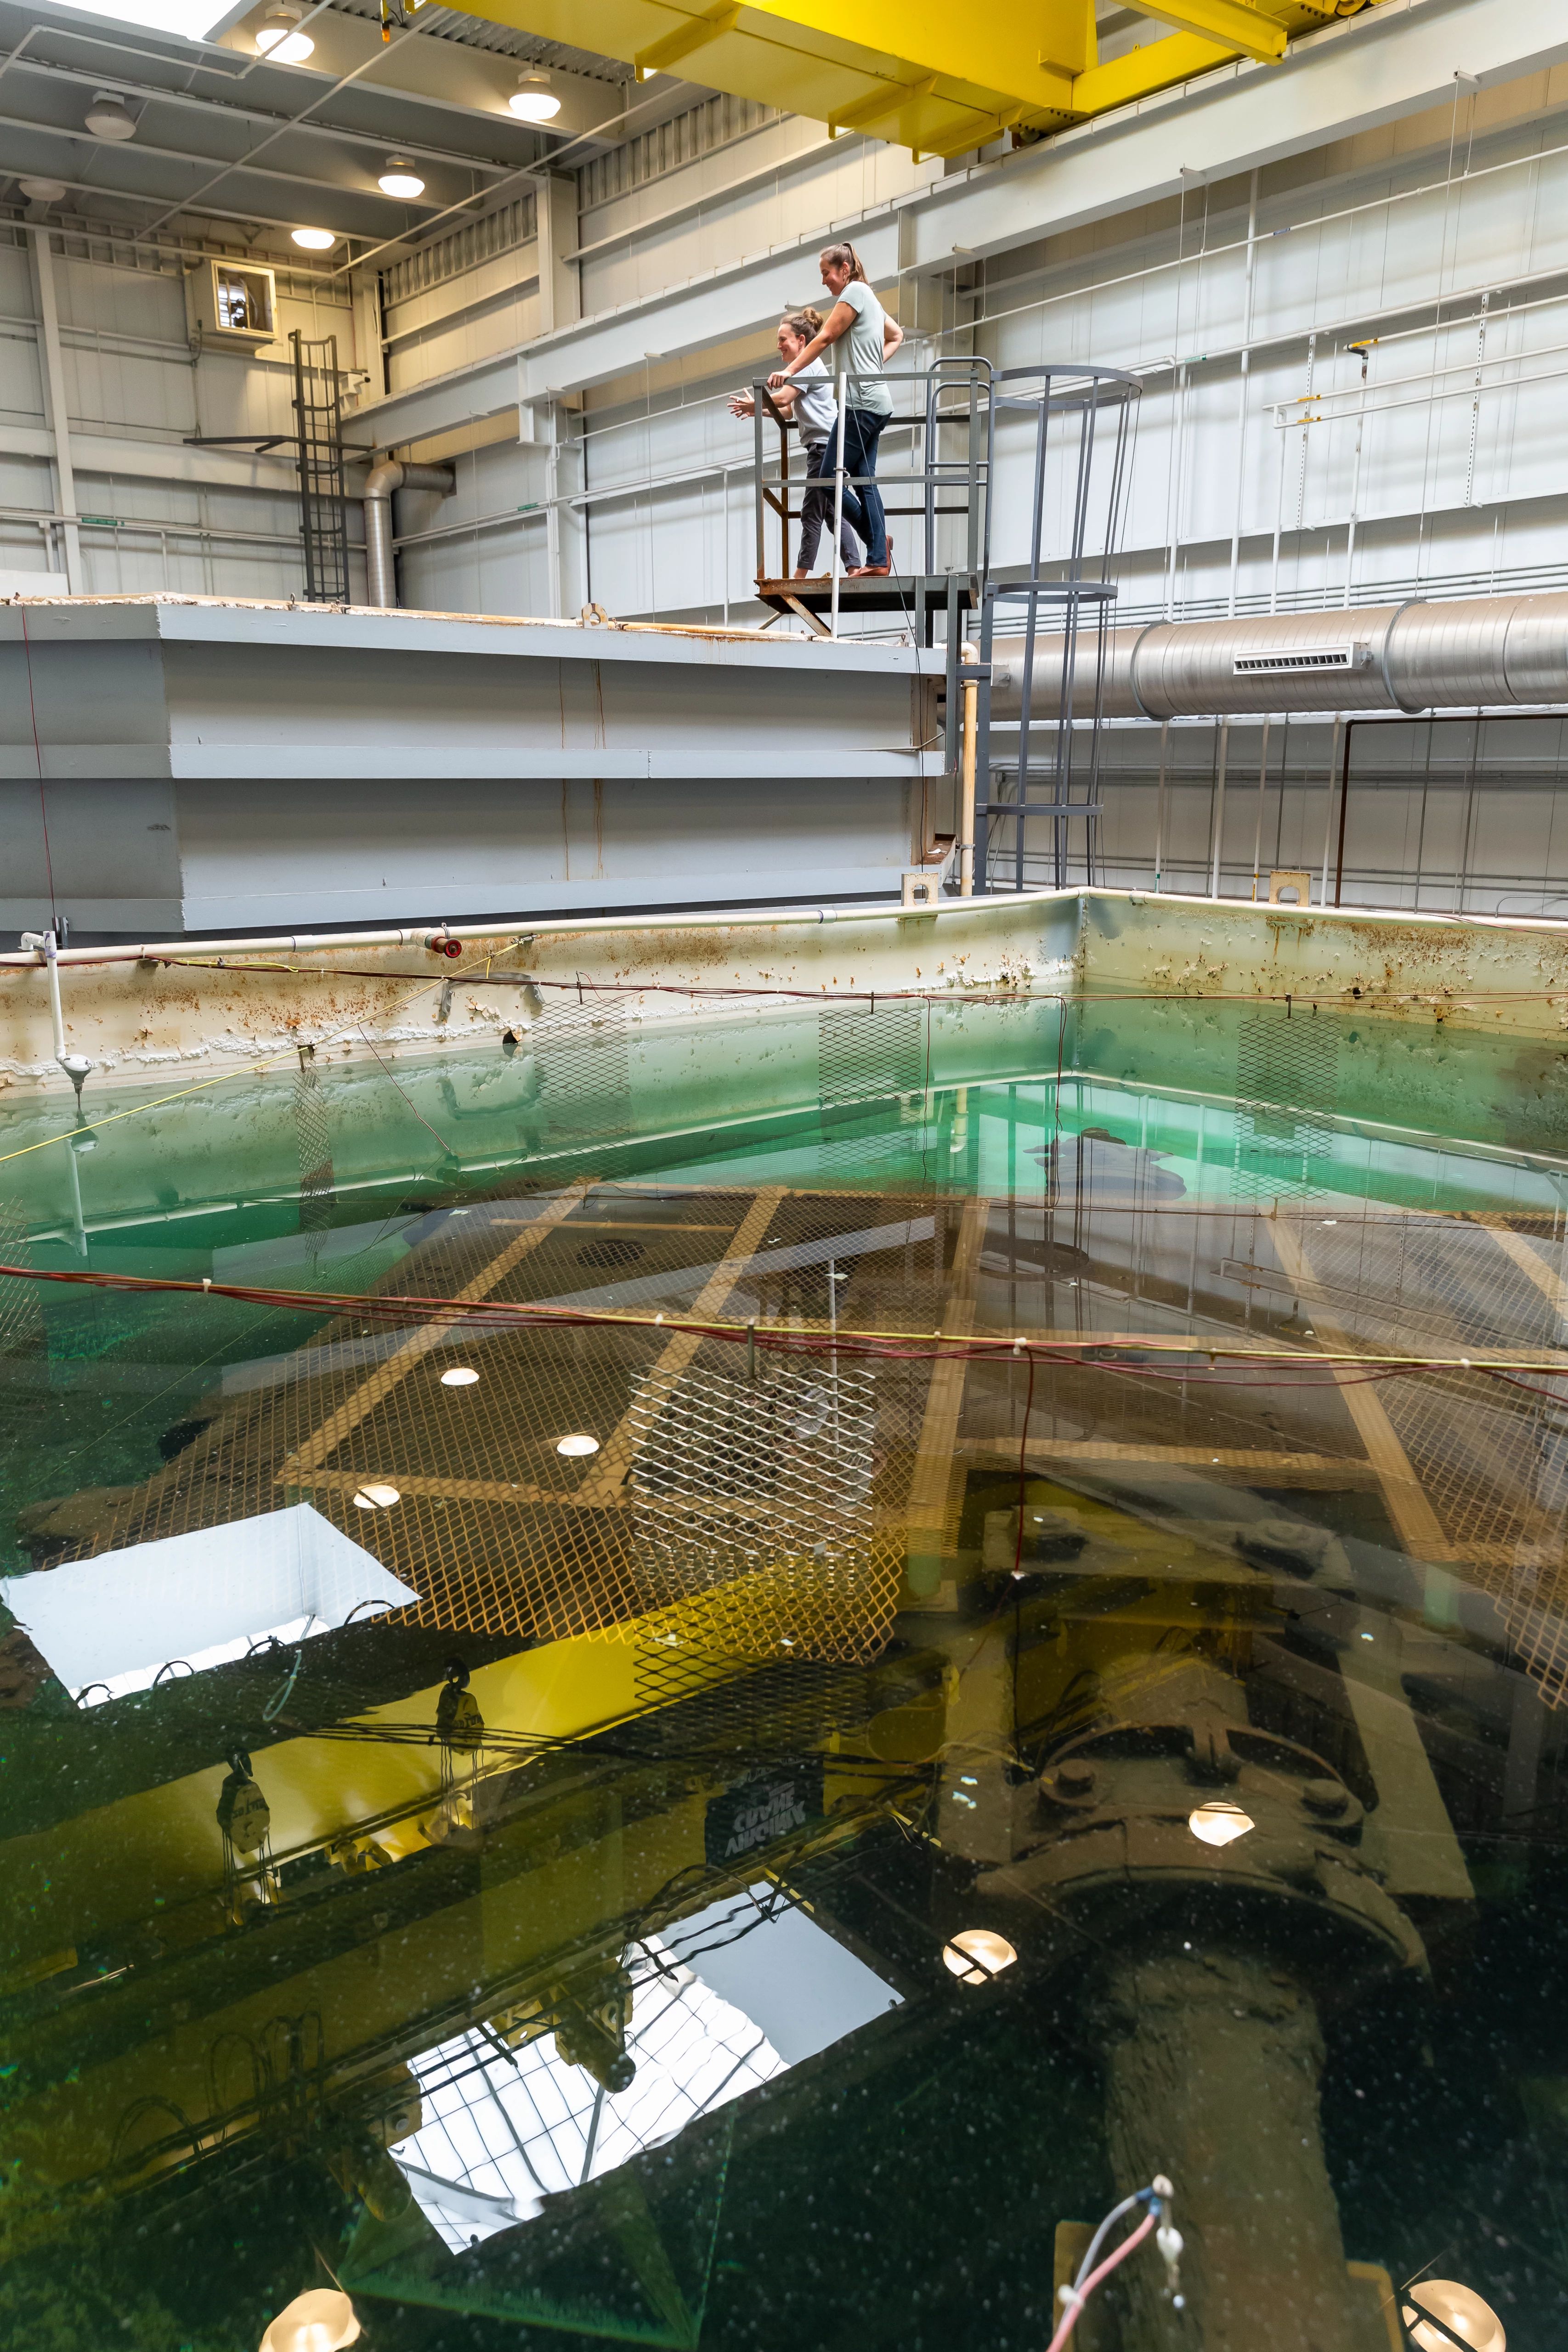 Image of large, industrial tanks holding corroded artifacts submerged in liquid. Two conservators stand on a platform over the larger tank.